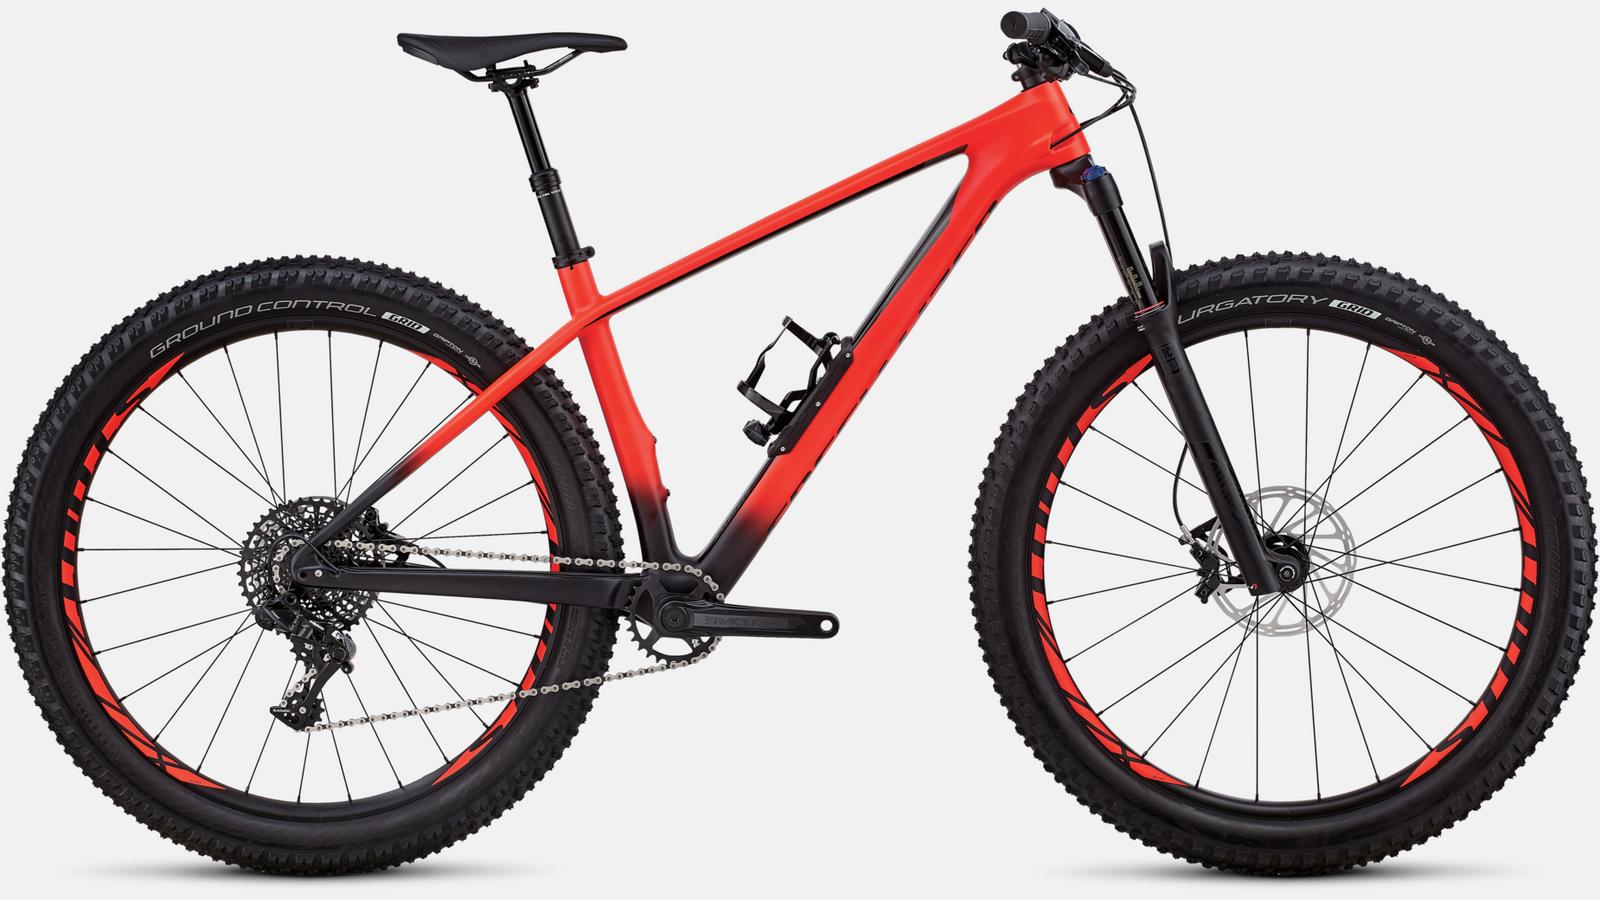 Touch-up paint for 2018 Specialized Fuse Comp Carbon 6Fattie/29 - Gloss Rocket Red